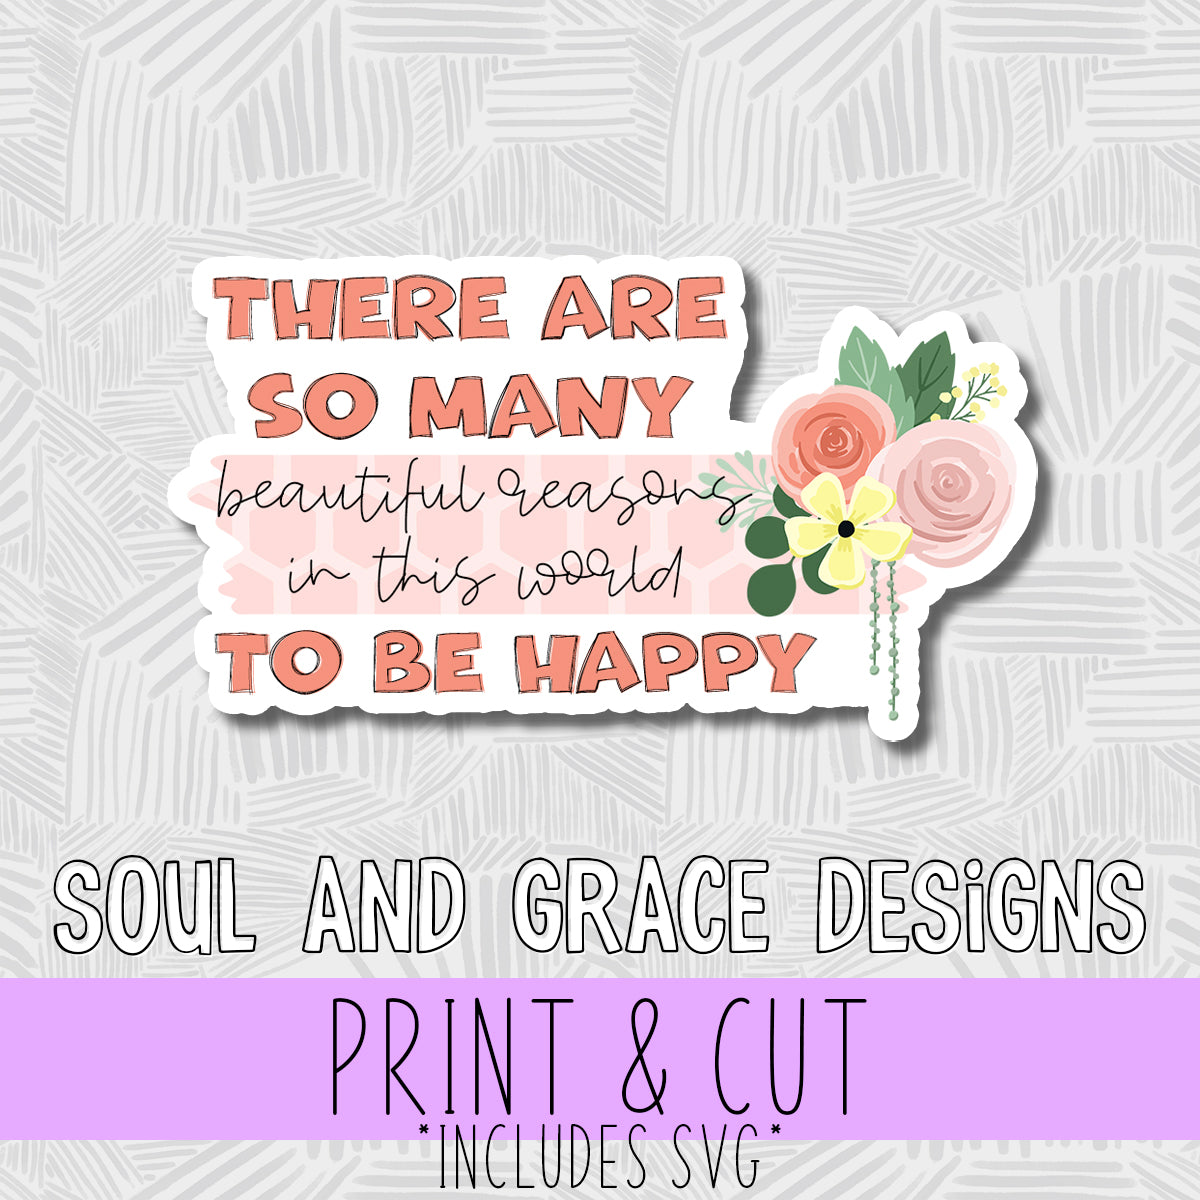 There Are So Many Reasons to Be Happy [Digital Sticker]